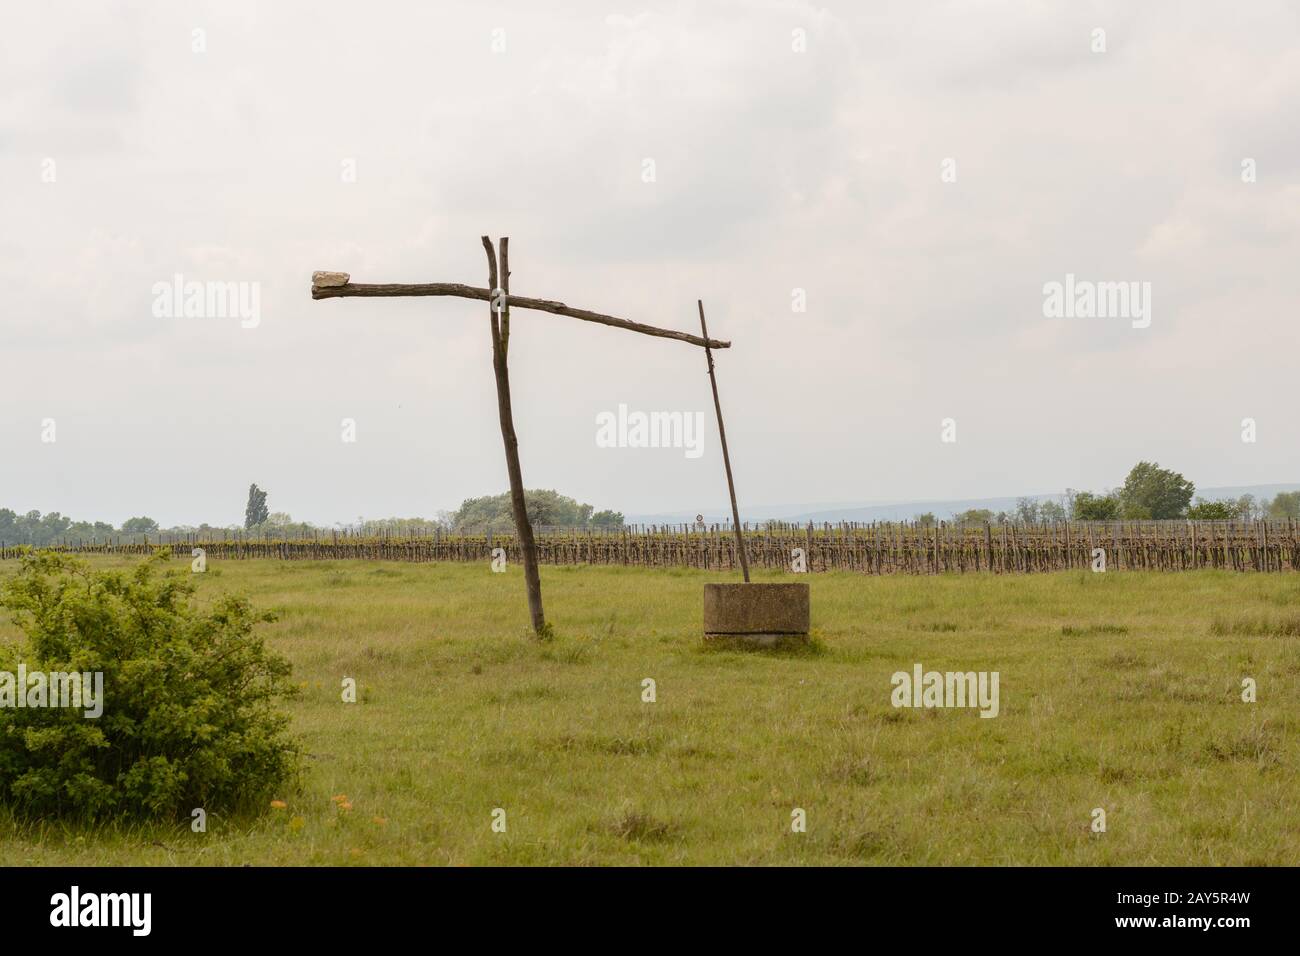 historical well worth seeing in Burgenland - Austria Stock Photo